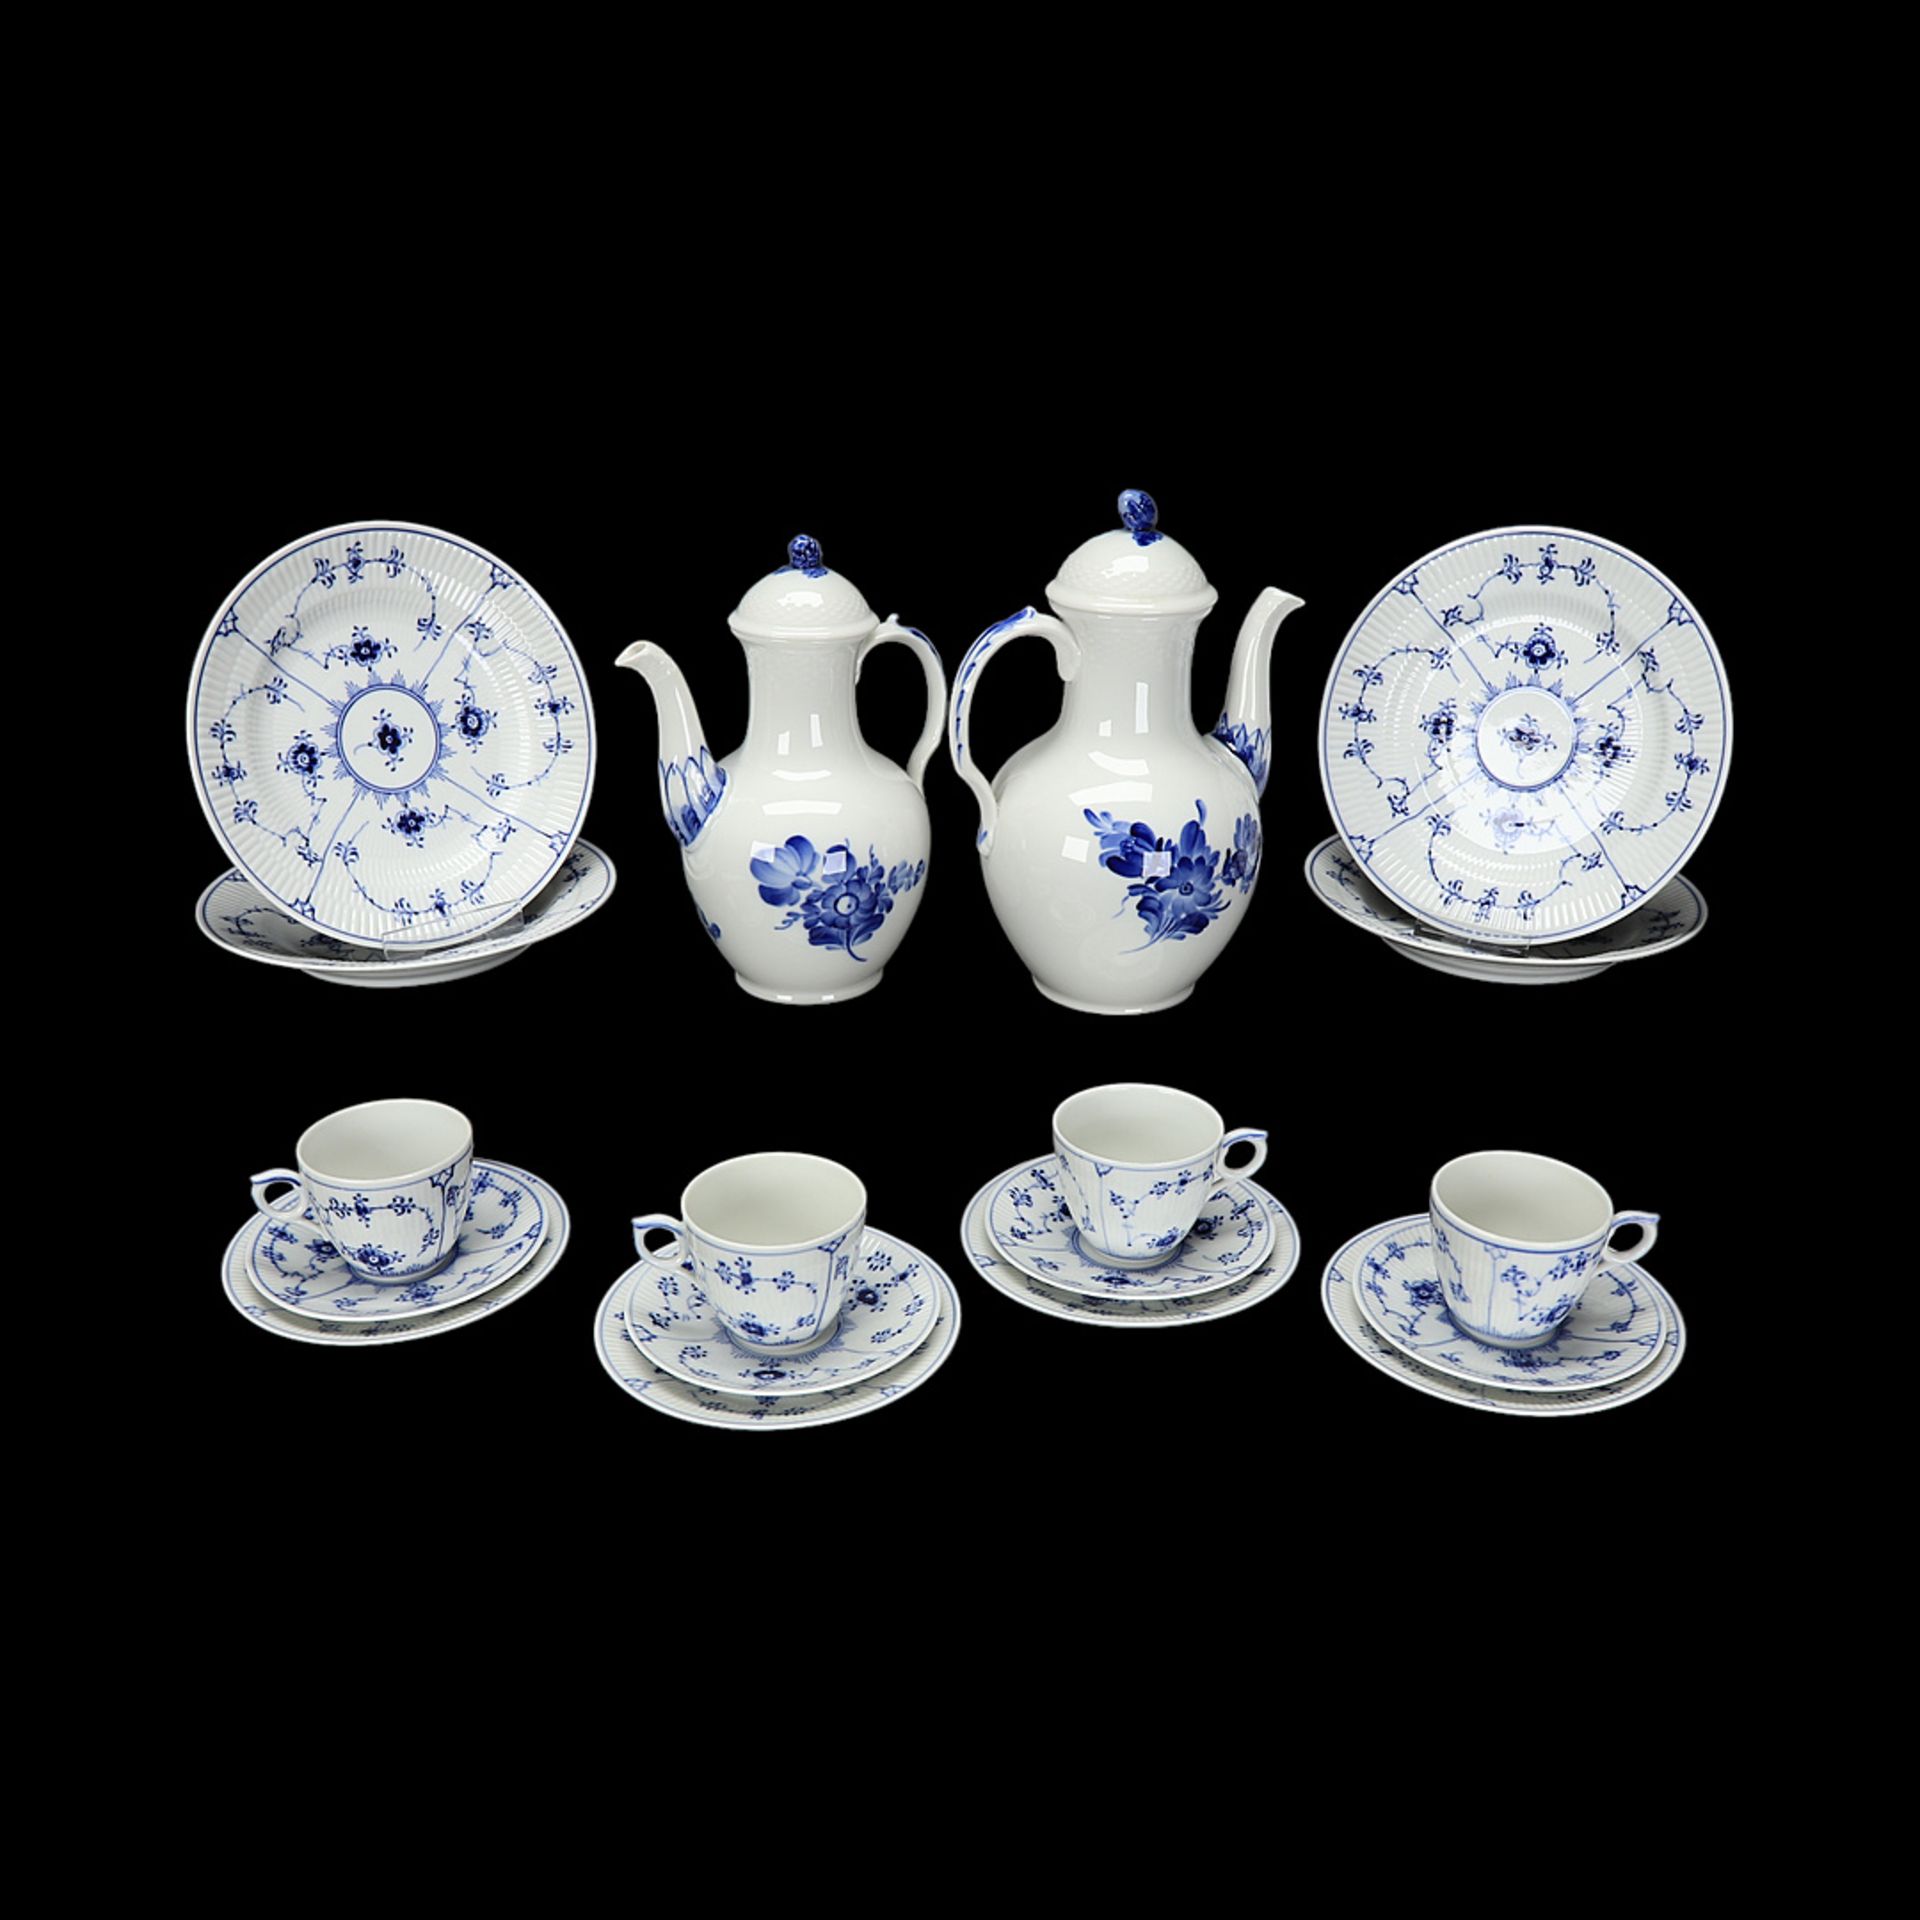 Four Royal Copenhagen place settings and two jugs